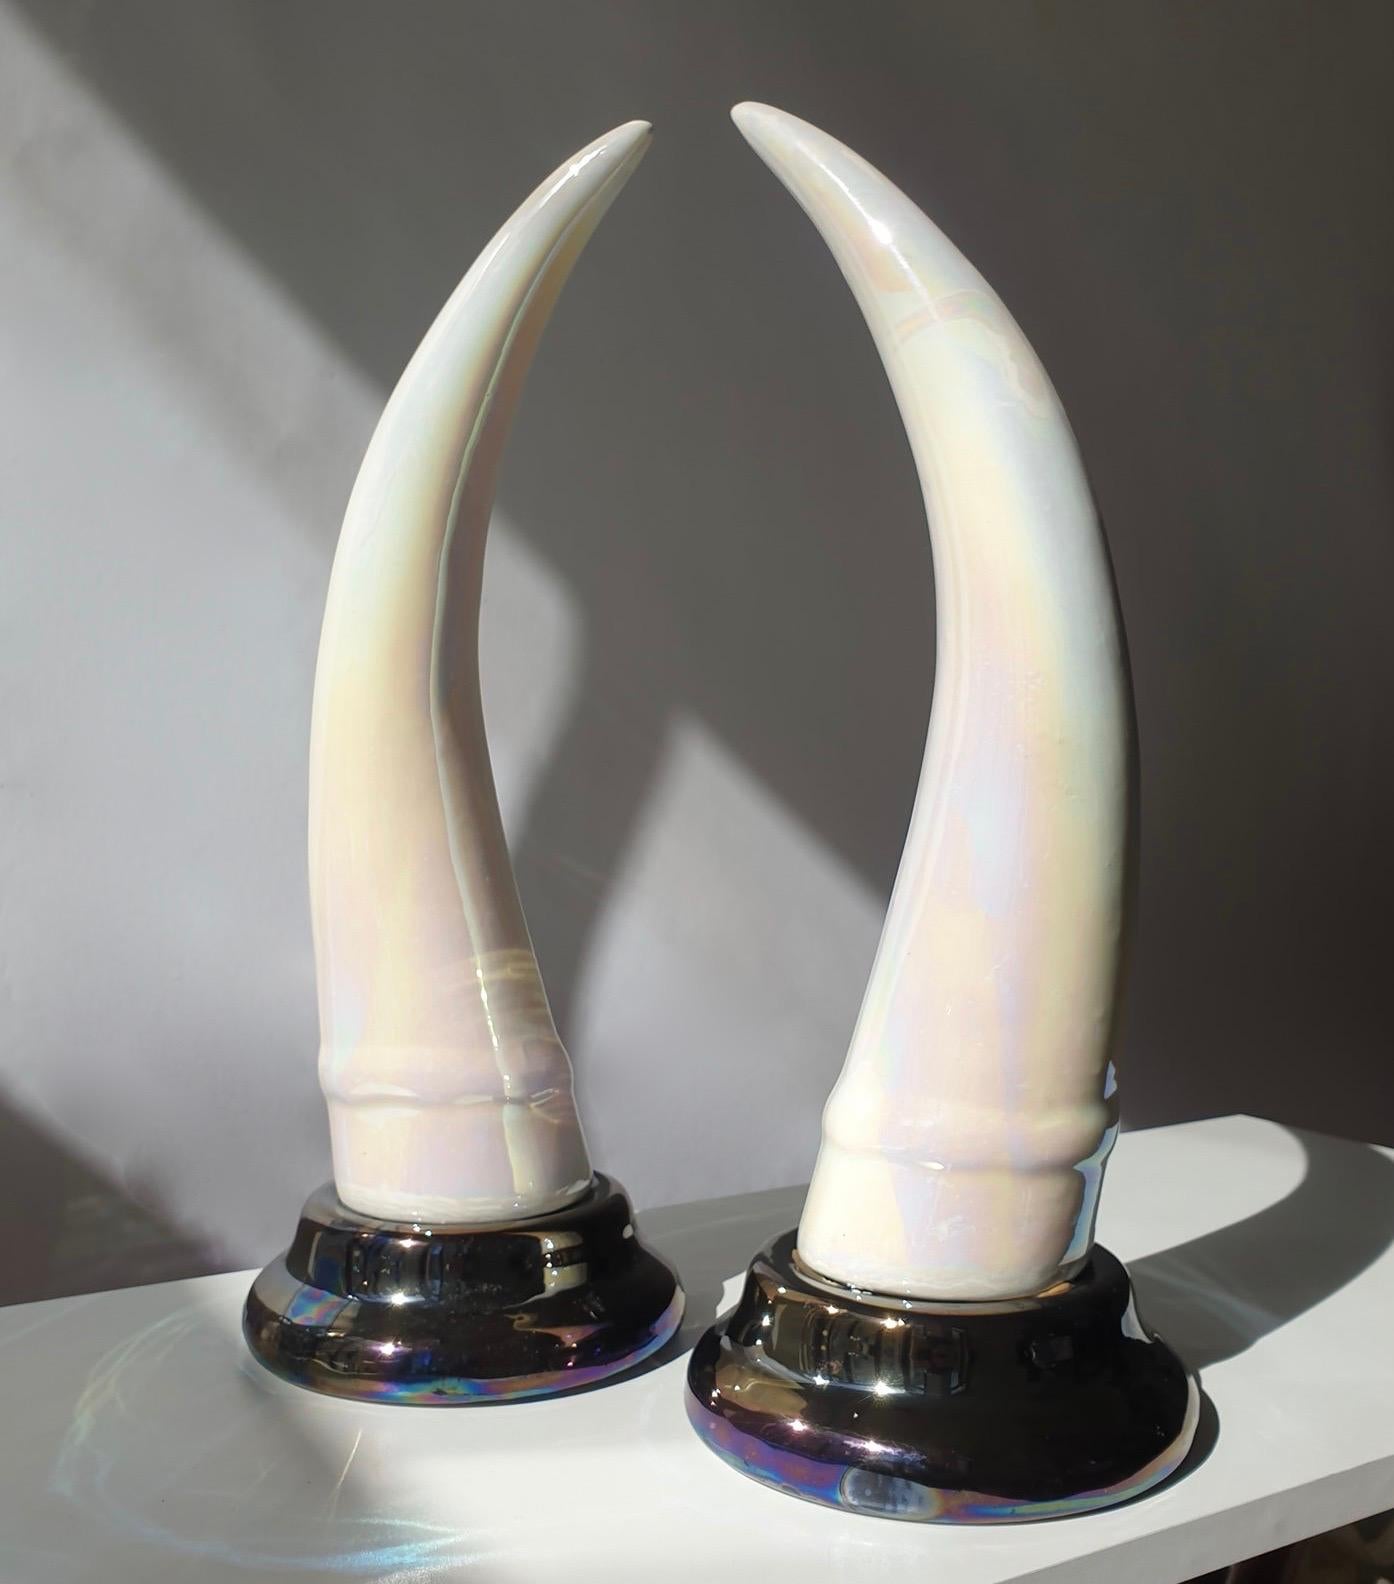 Elegant pair of 'Elephant Tusk' horn, made of iridescent ceramic, mounted on ceramic base.
Decorative ornaments for your desk, dresser or in front of your entrance hall mirror
Measures: Diameter 18 cm.
Height 50 cm.